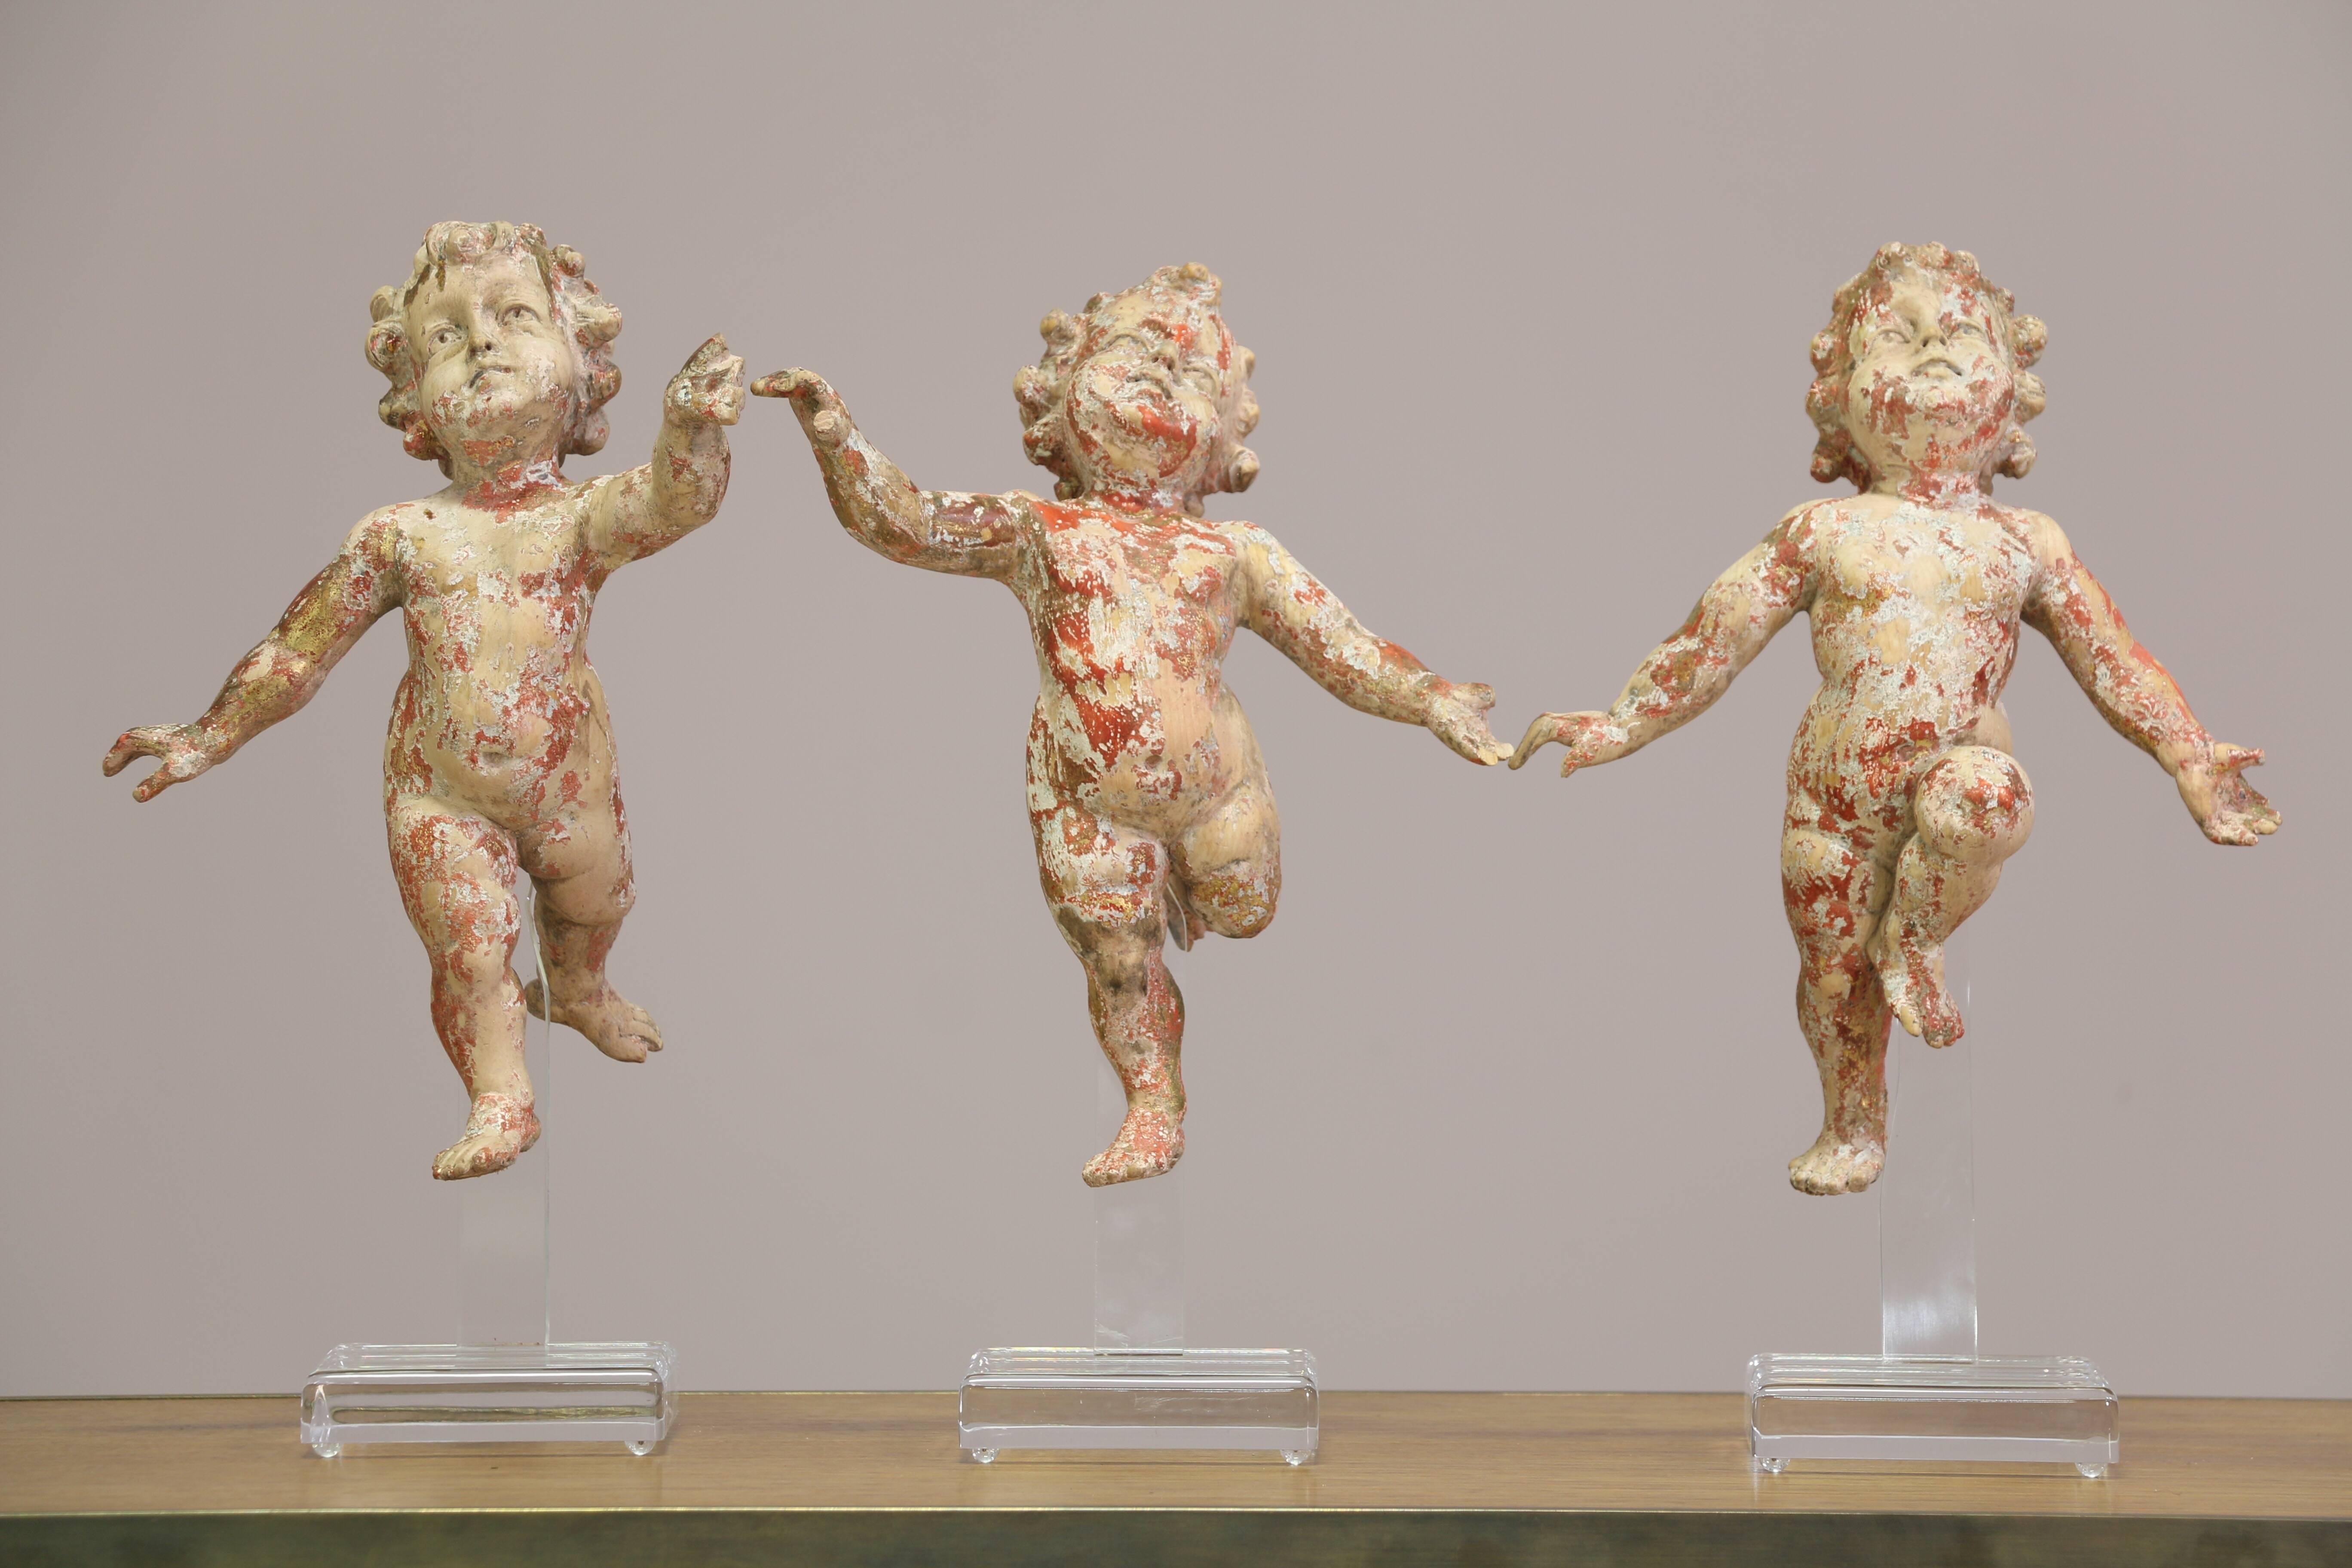 Angelic set of three Italian early 20th century carved giltwood putti each mounted on new custom-made acrylic stands. Minor wood loss and restoration. Paint finish is naturally distressed. Measurements are for each sculpture. Sold as a set of three.